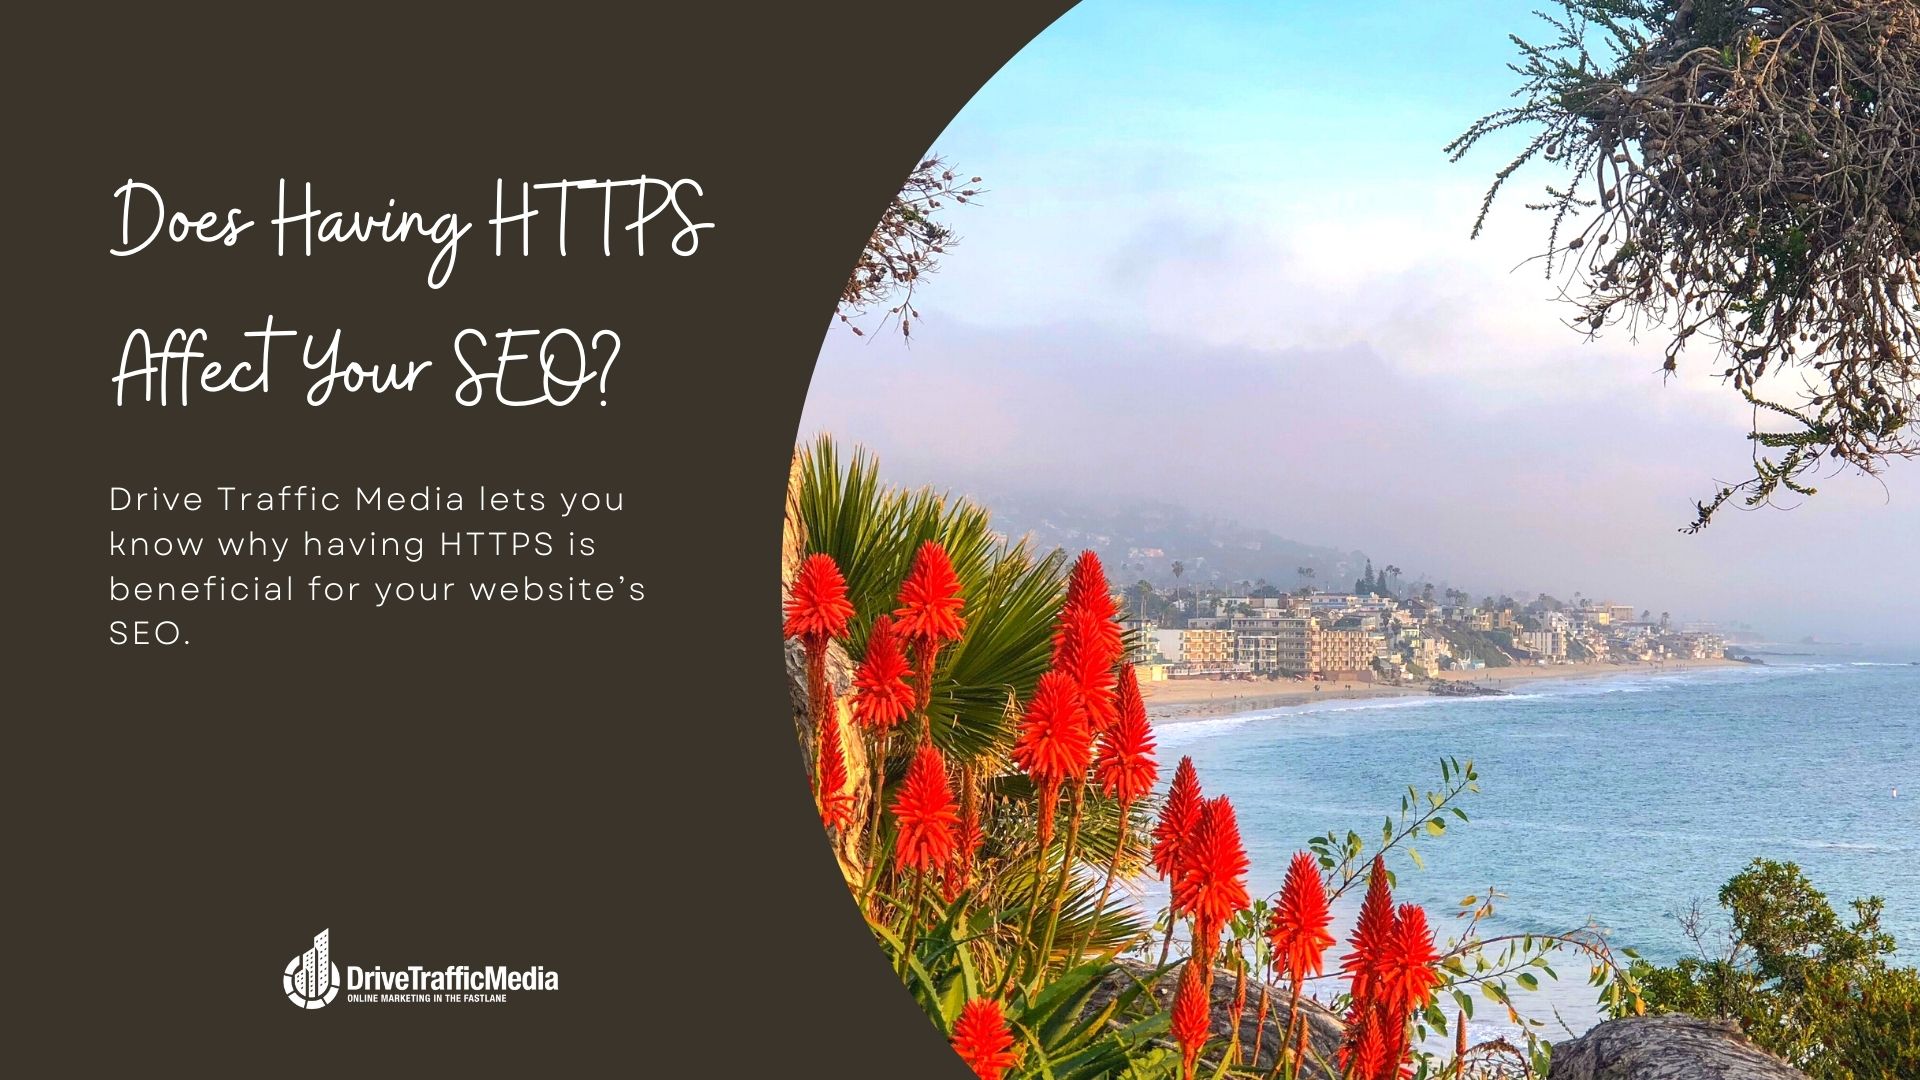 having-https-is-beneficial-for-seo-according-to-a-digital-marketing-agency-in-orange-county